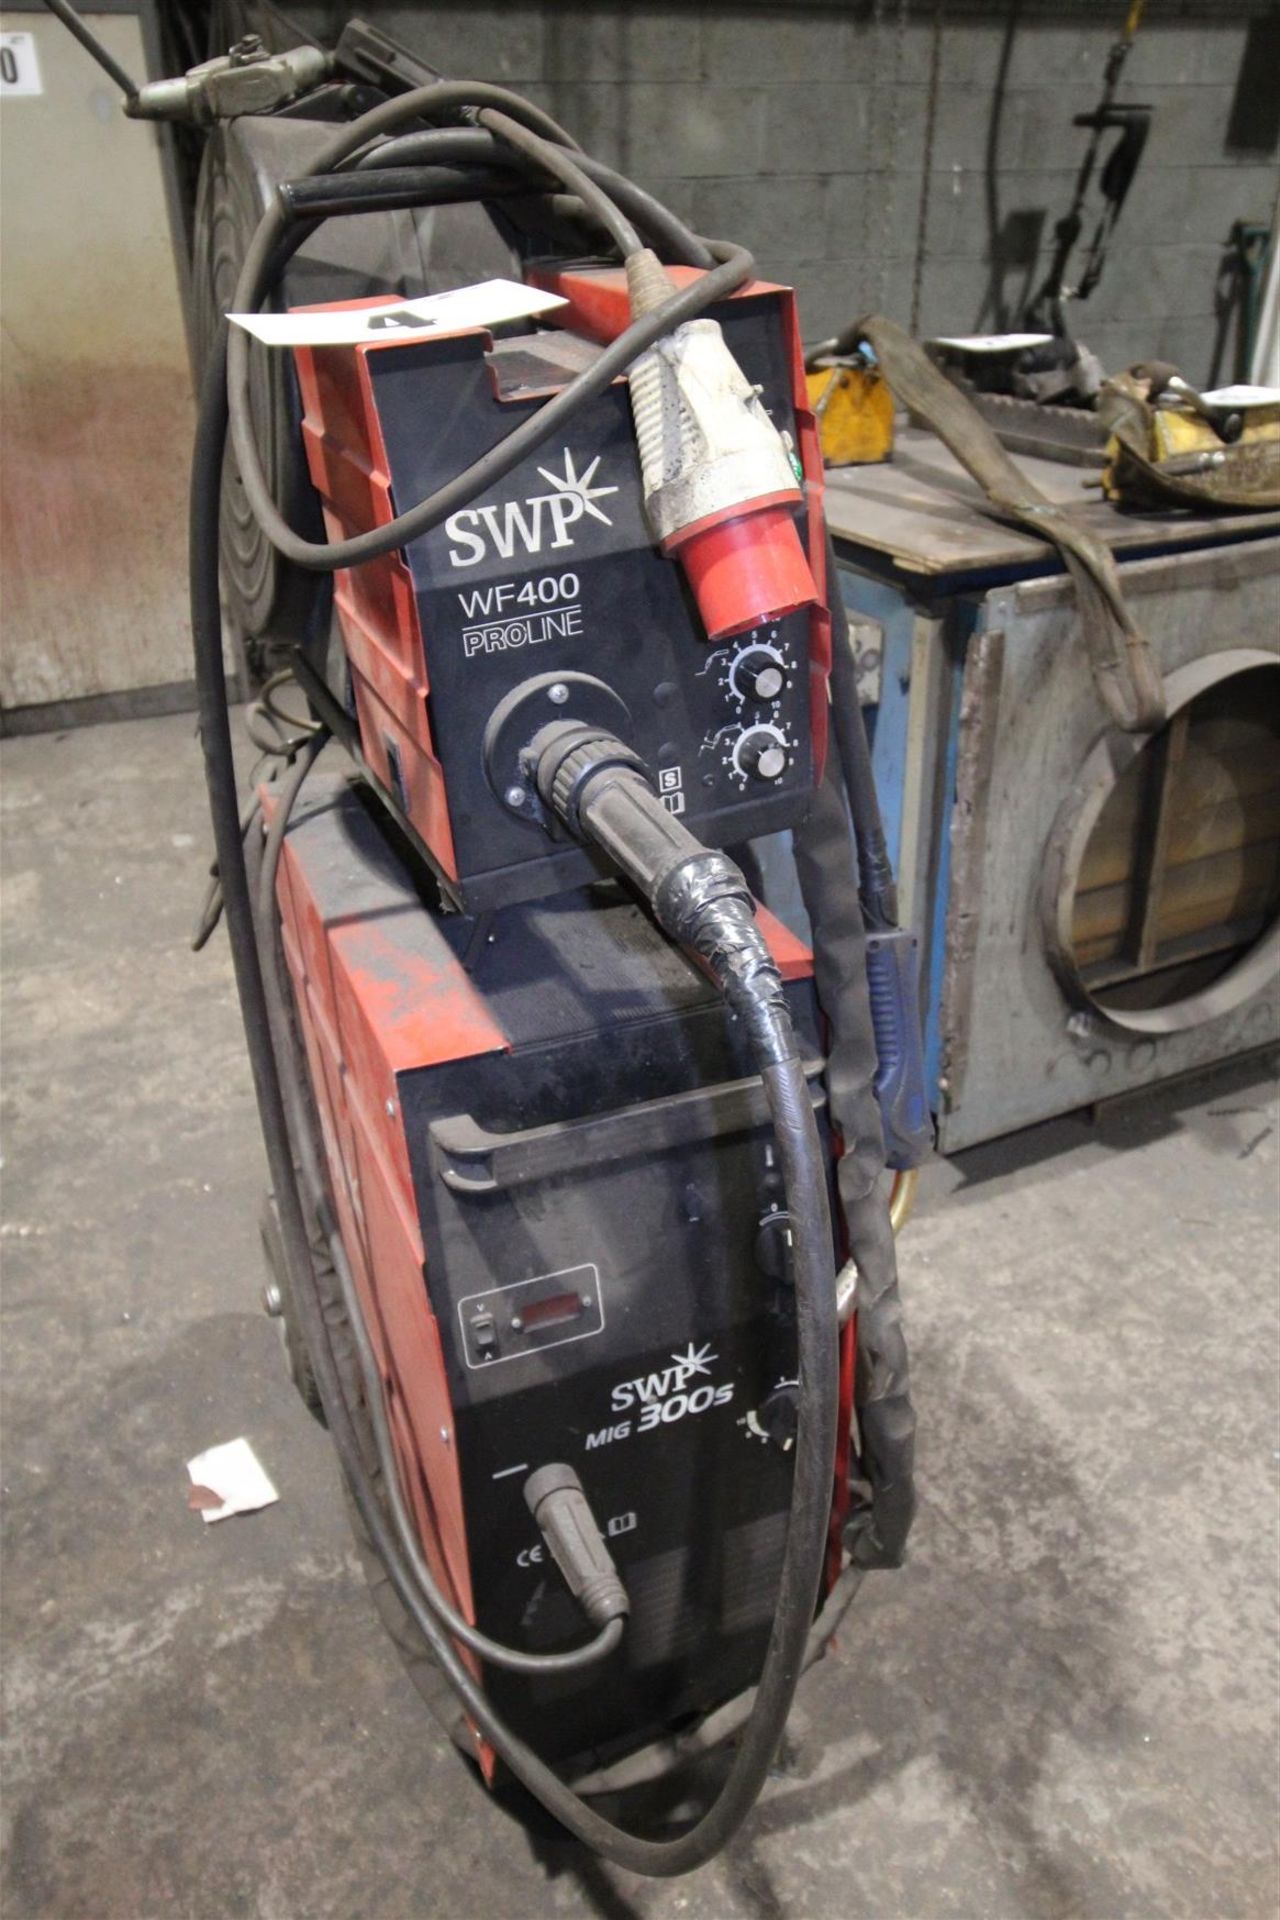 SWP MIG300S MIG WELDER COMPLETE WITH SWP WF400 WIRE FEED